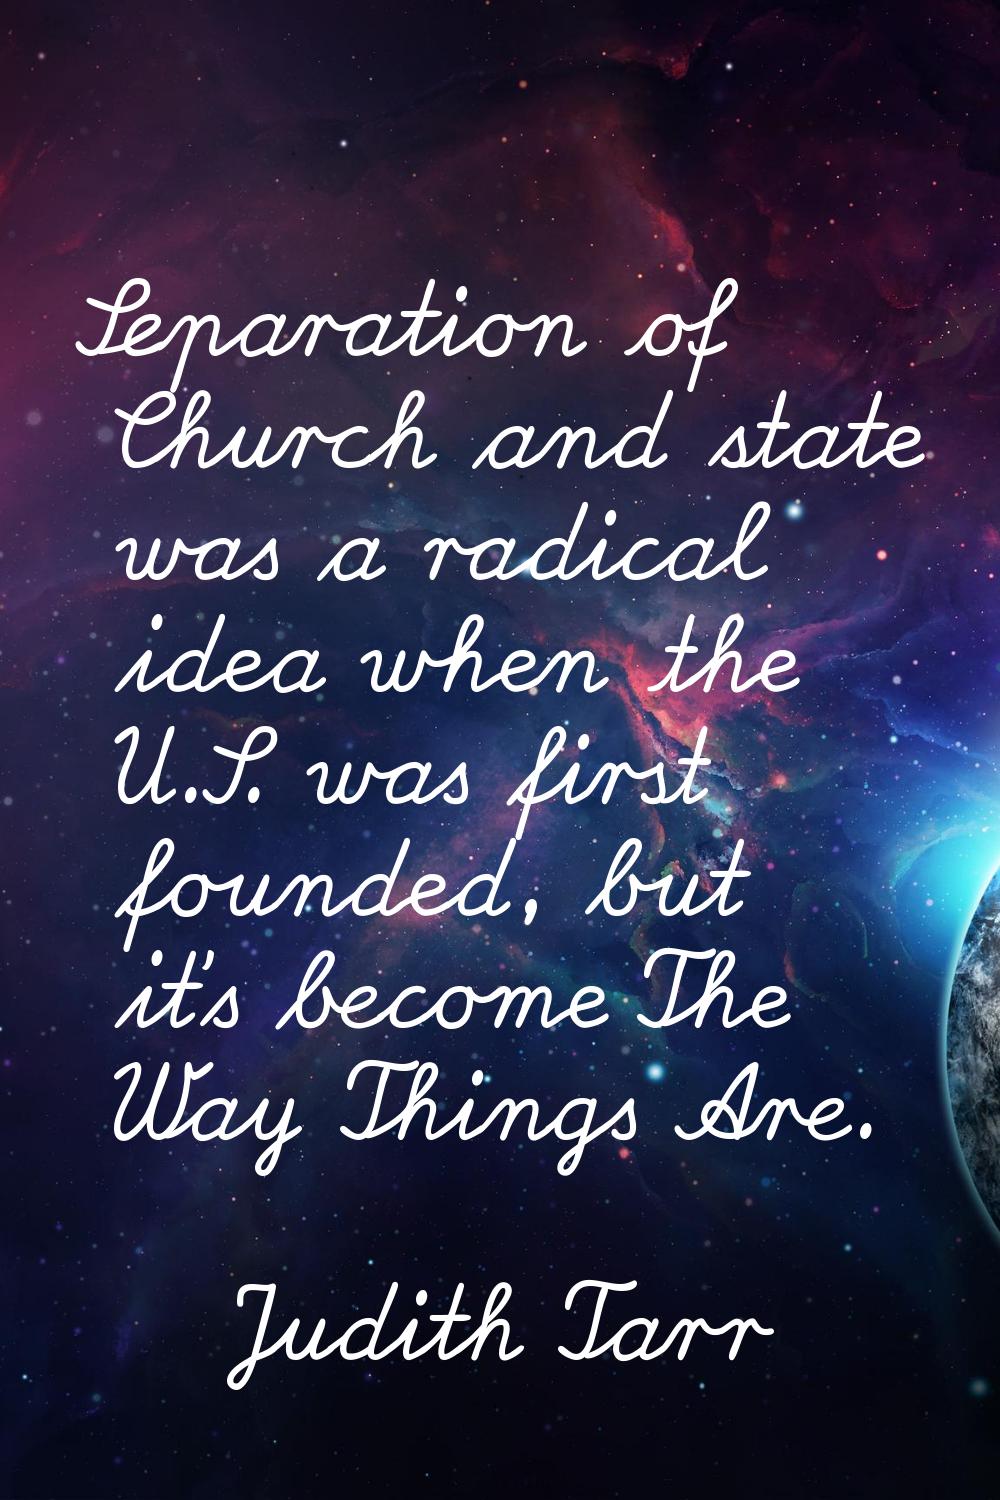 Separation of Church and state was a radical idea when the U.S. was first founded, but it's become 